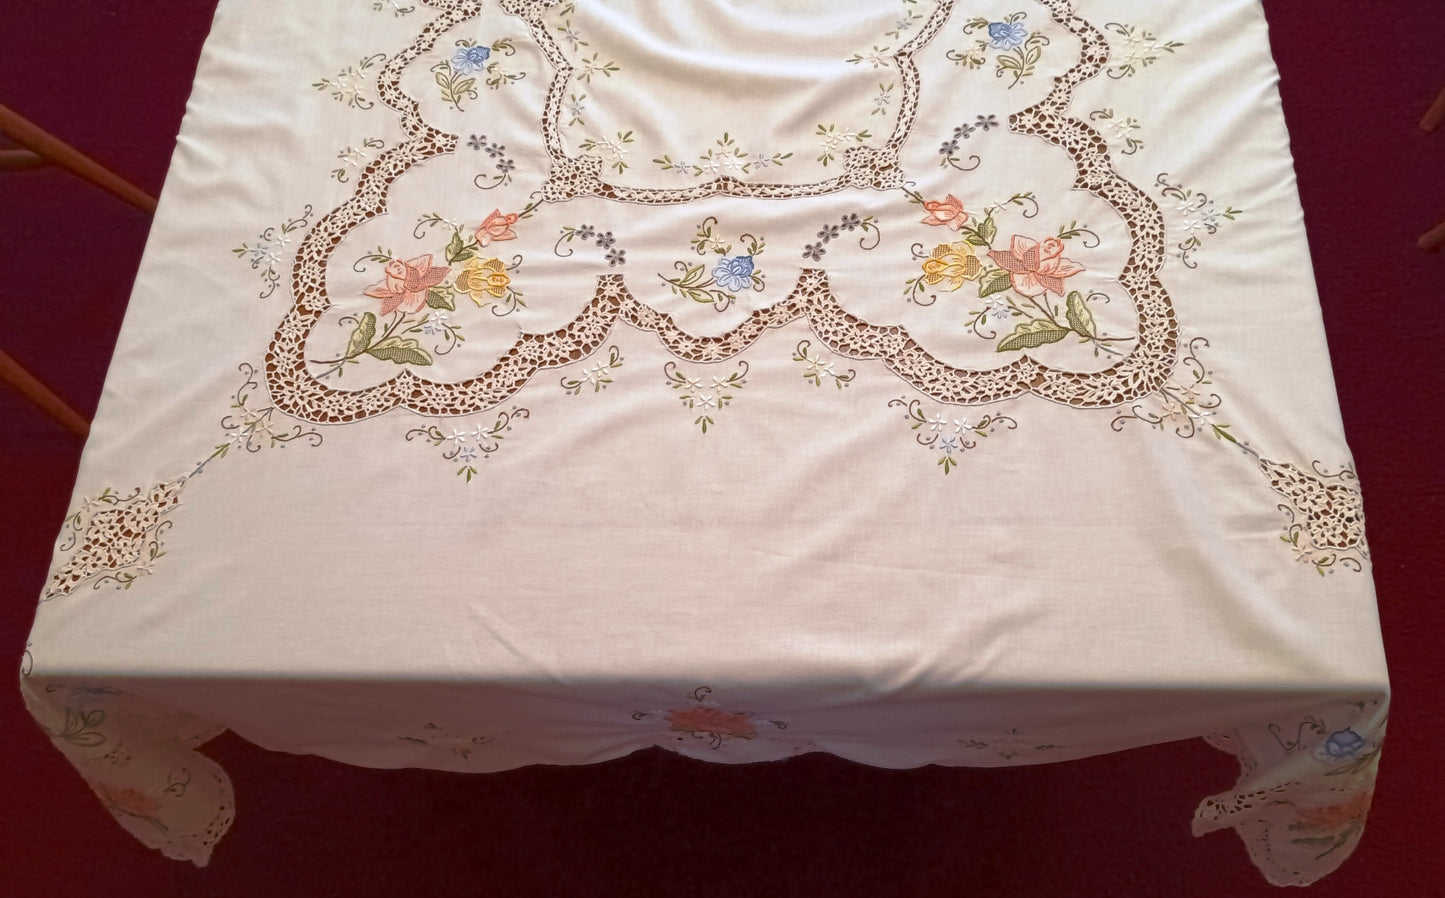 Vintage Elegant Tablecloth Crochet Lace Embroidered Floral Beige Linen Cotton Medallion Rectangle Dining Table Cover 66” W x 82“L